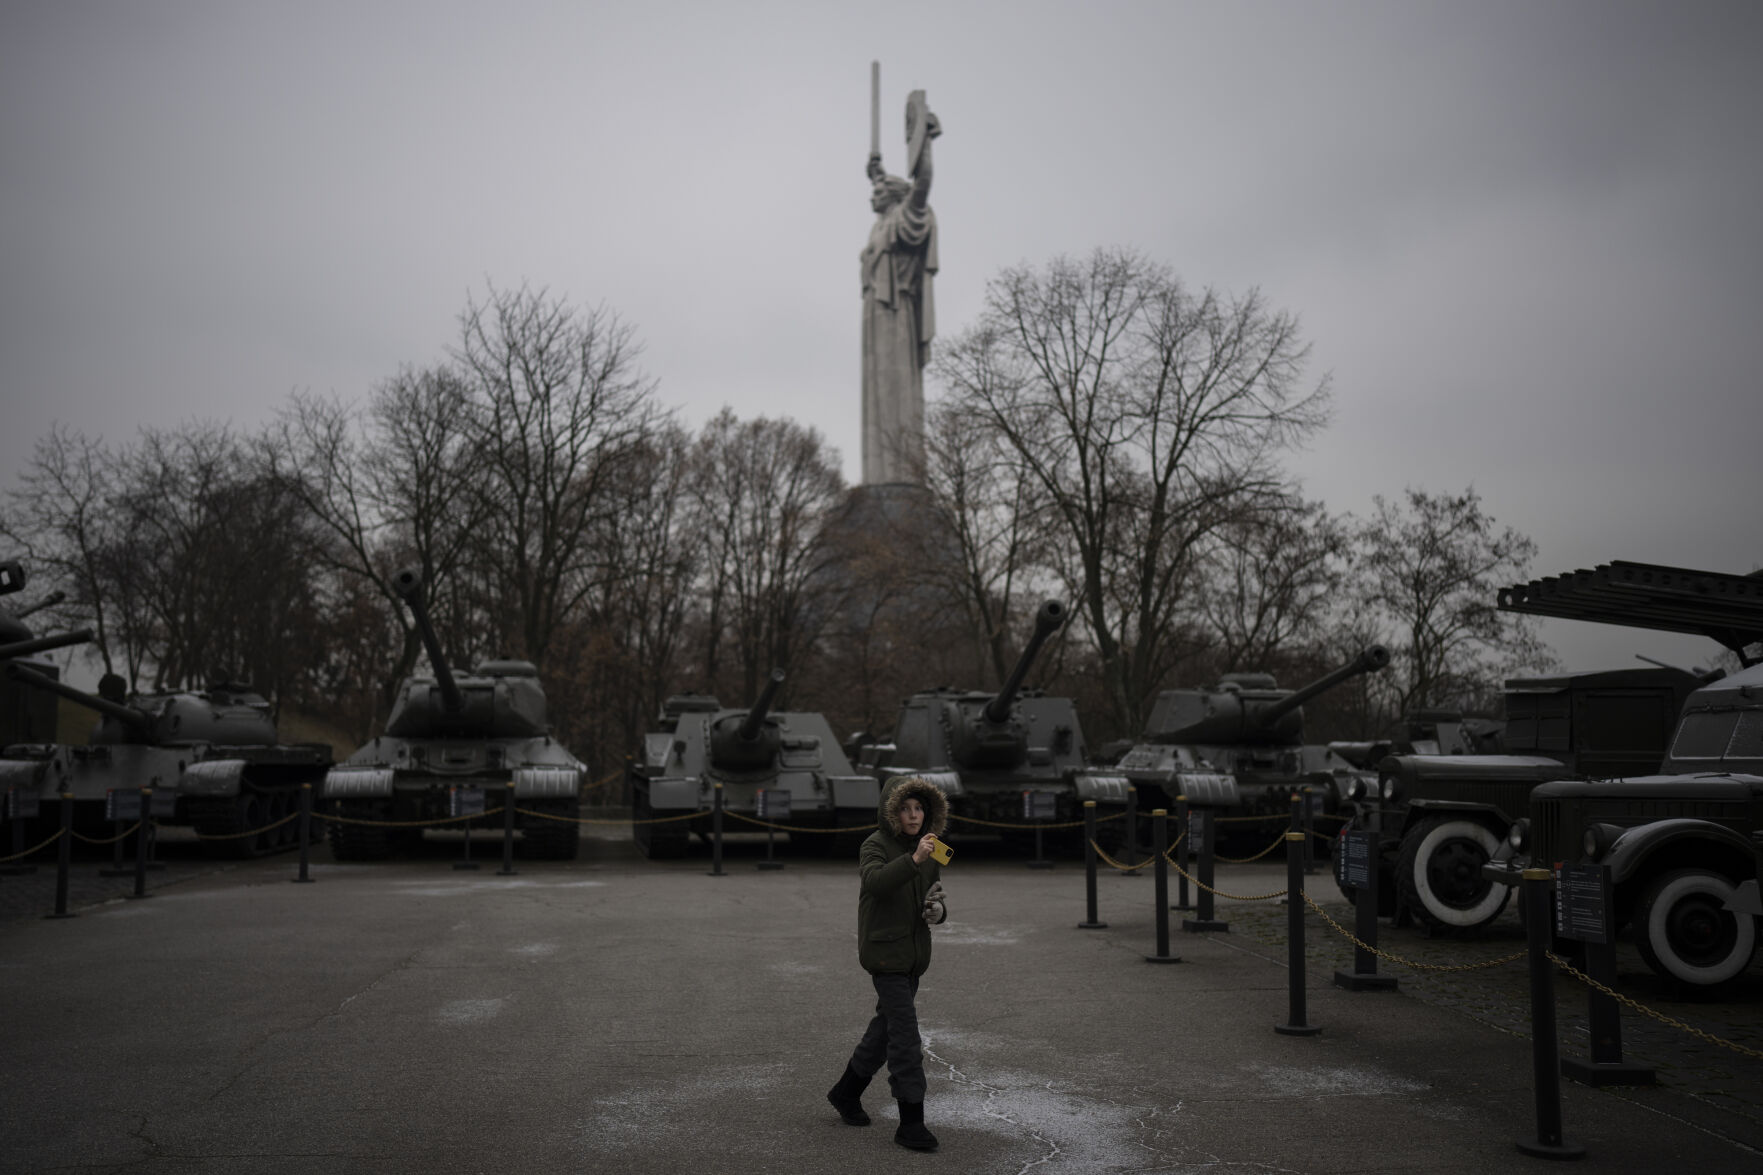 <p>A boy takes pictures of old tanks on display at a war museum in Kyiv, Ukraine, Wednesday, Jan. 25, 2023. (AP Photo/Daniel Cole)</p>   PHOTO CREDIT: Daniel Cole - stringer, AP